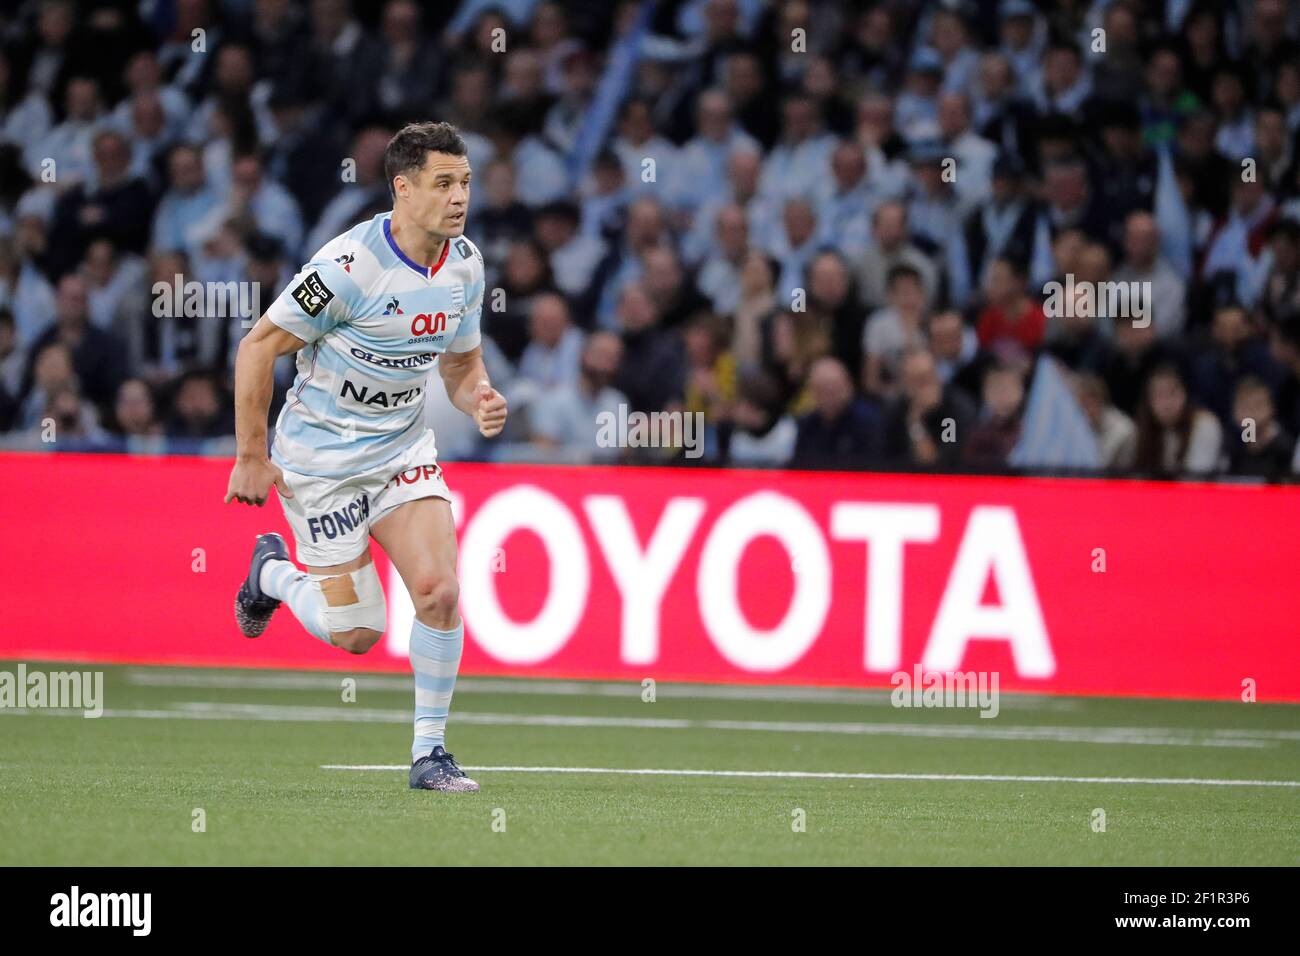 Daniel William Carter - Dan Carter (Racing 92) runned during the French Championship Top 14 Rugby Union match between Racing 92 and La Rochelle on february 18, 2018 at U Arena in Nanterre, France - Photo Stephane Allaman / DPPI Stock Photo